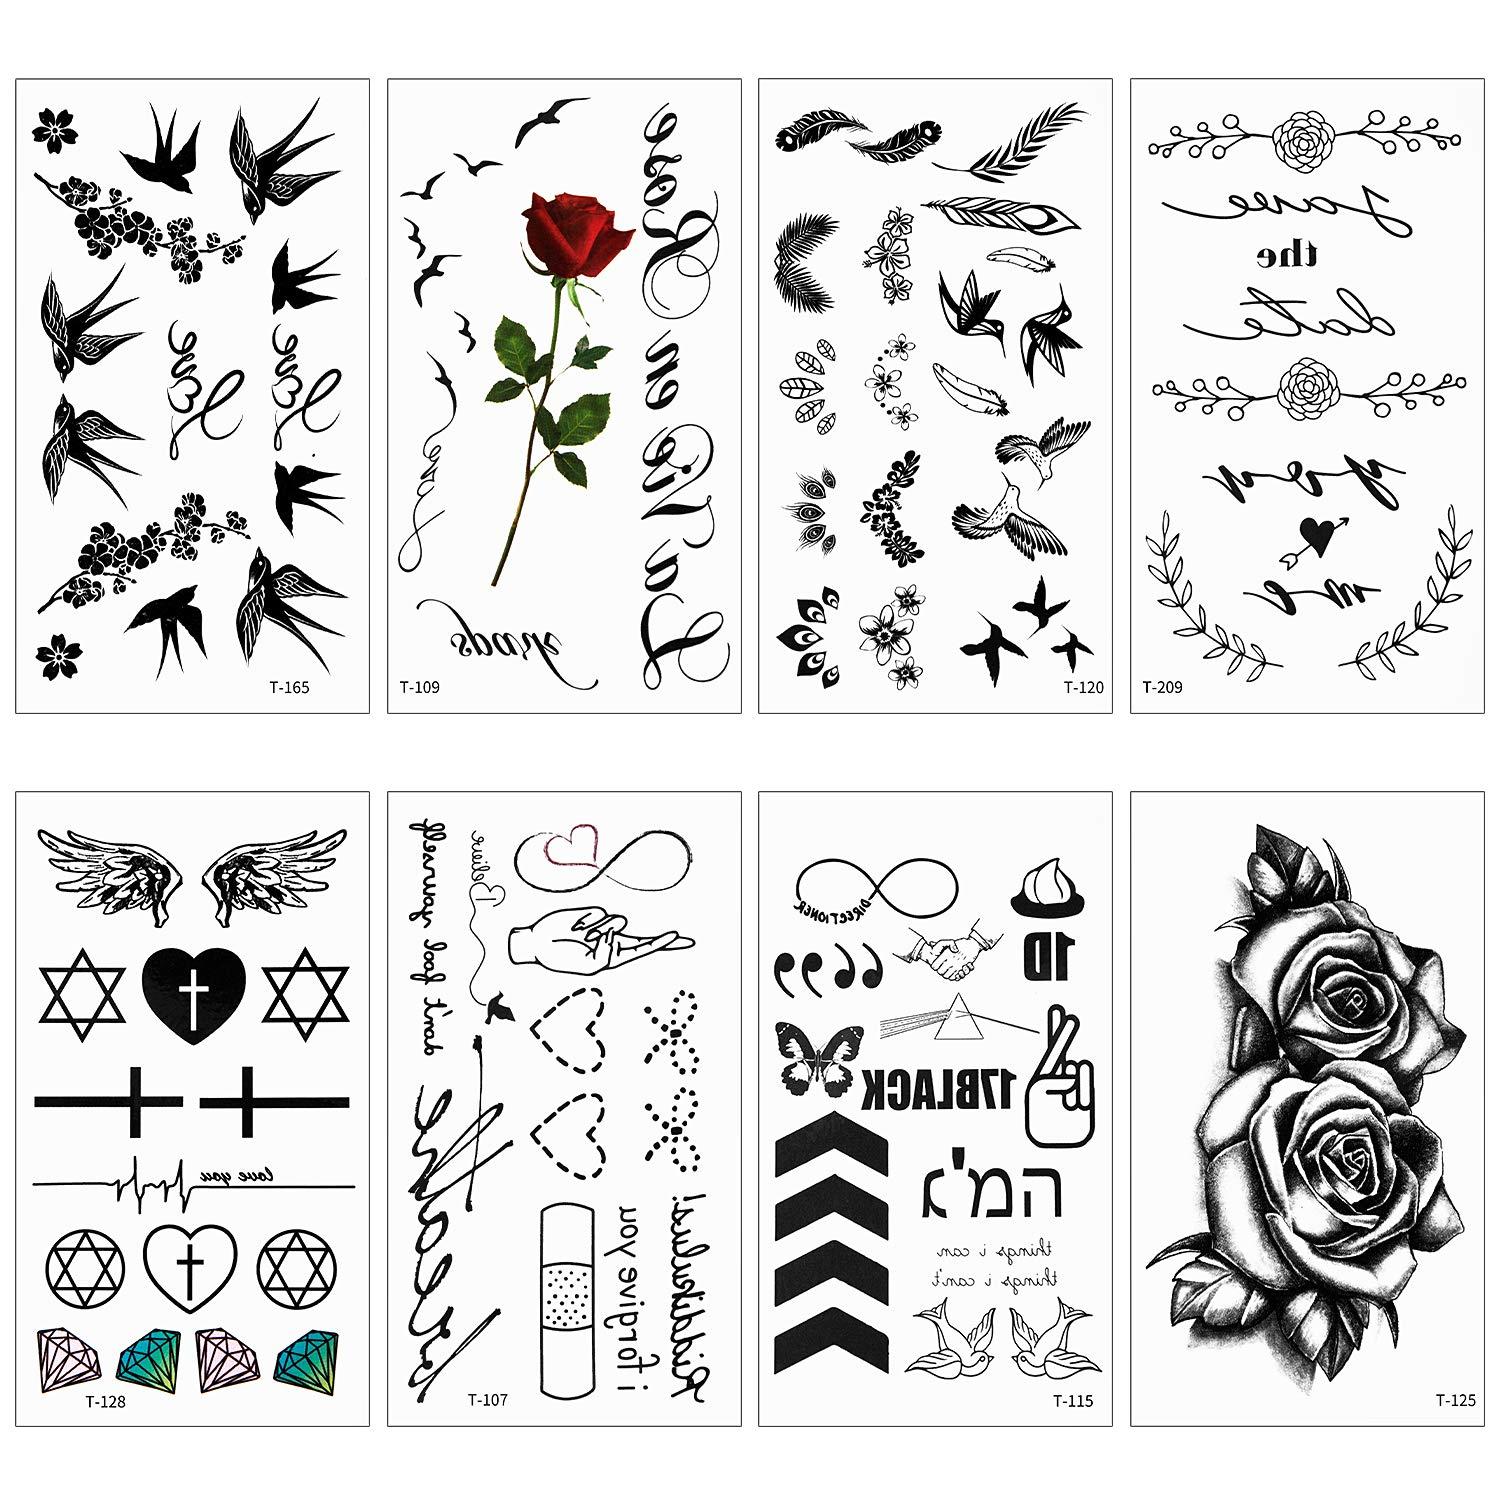 Buy Temporary Tattoos Lovely English Words & Black Designs Body Art Make up  for Women Fake Tattoo Sticker Waterproof Tattoo with Star Heart 10 Sheets  Online - Shop Home & Garden on